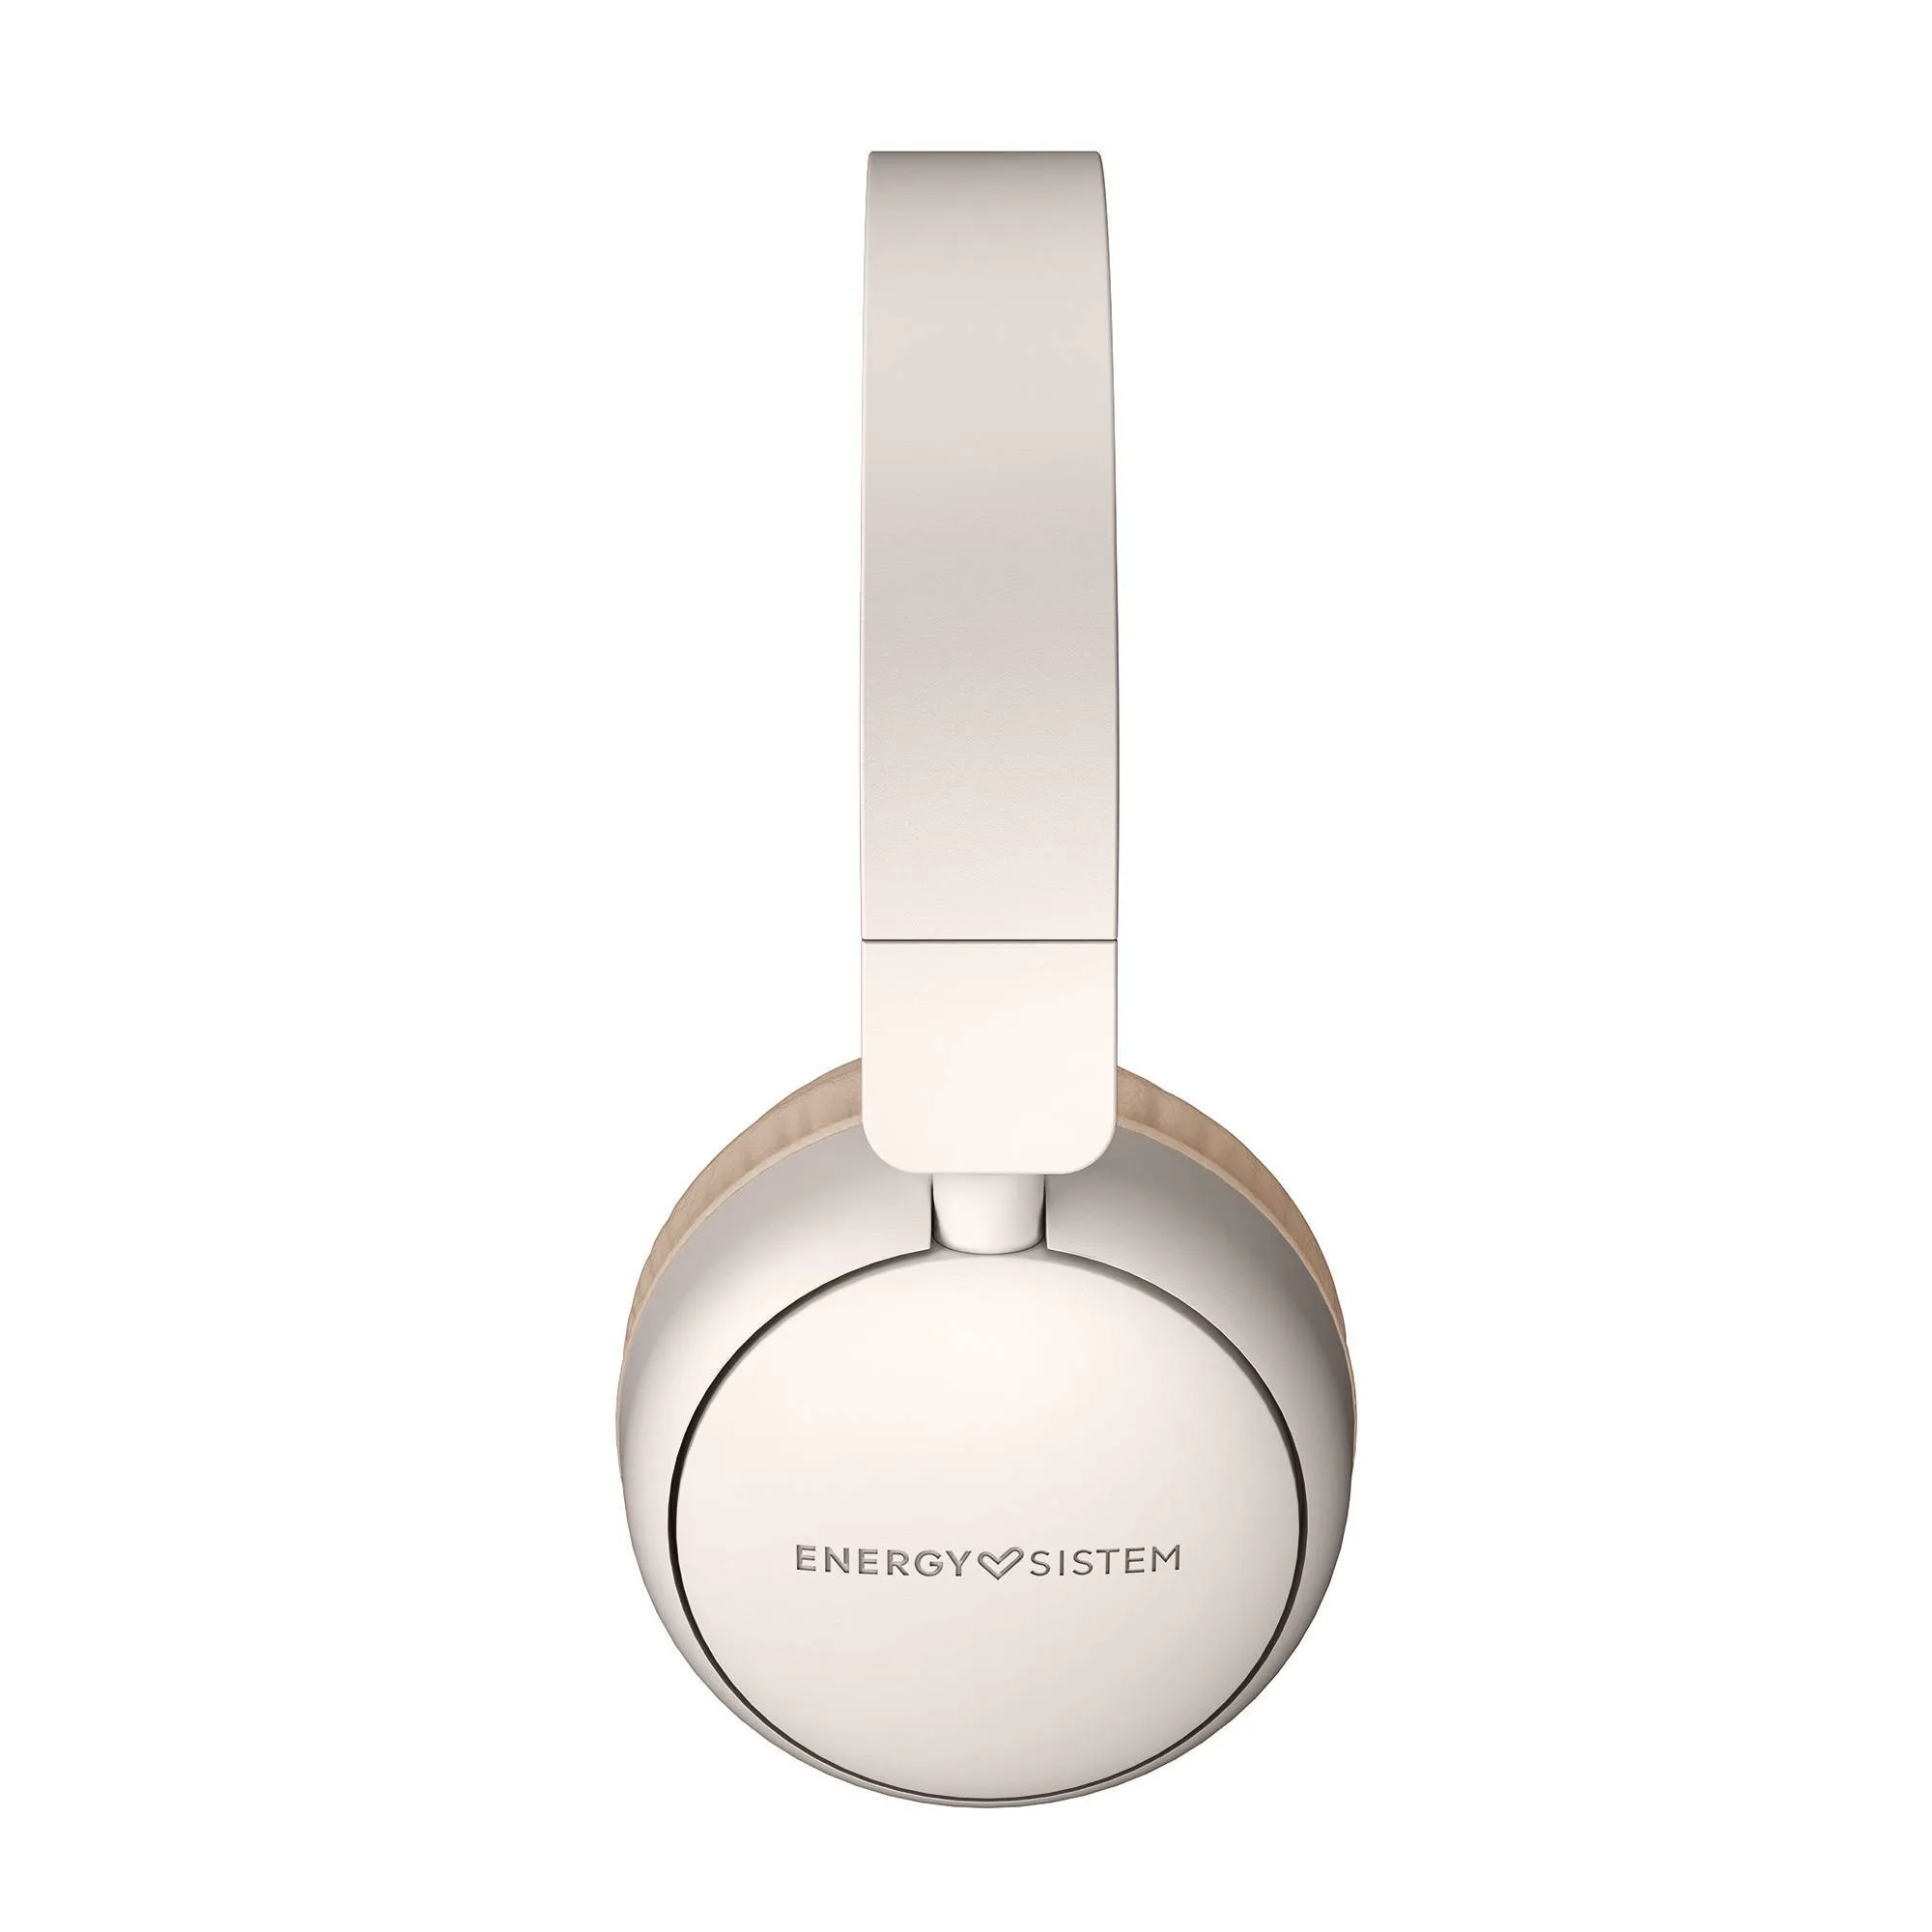 Radio Color cream headphones with Bluetooth 5.3 and up to 16h of battery life